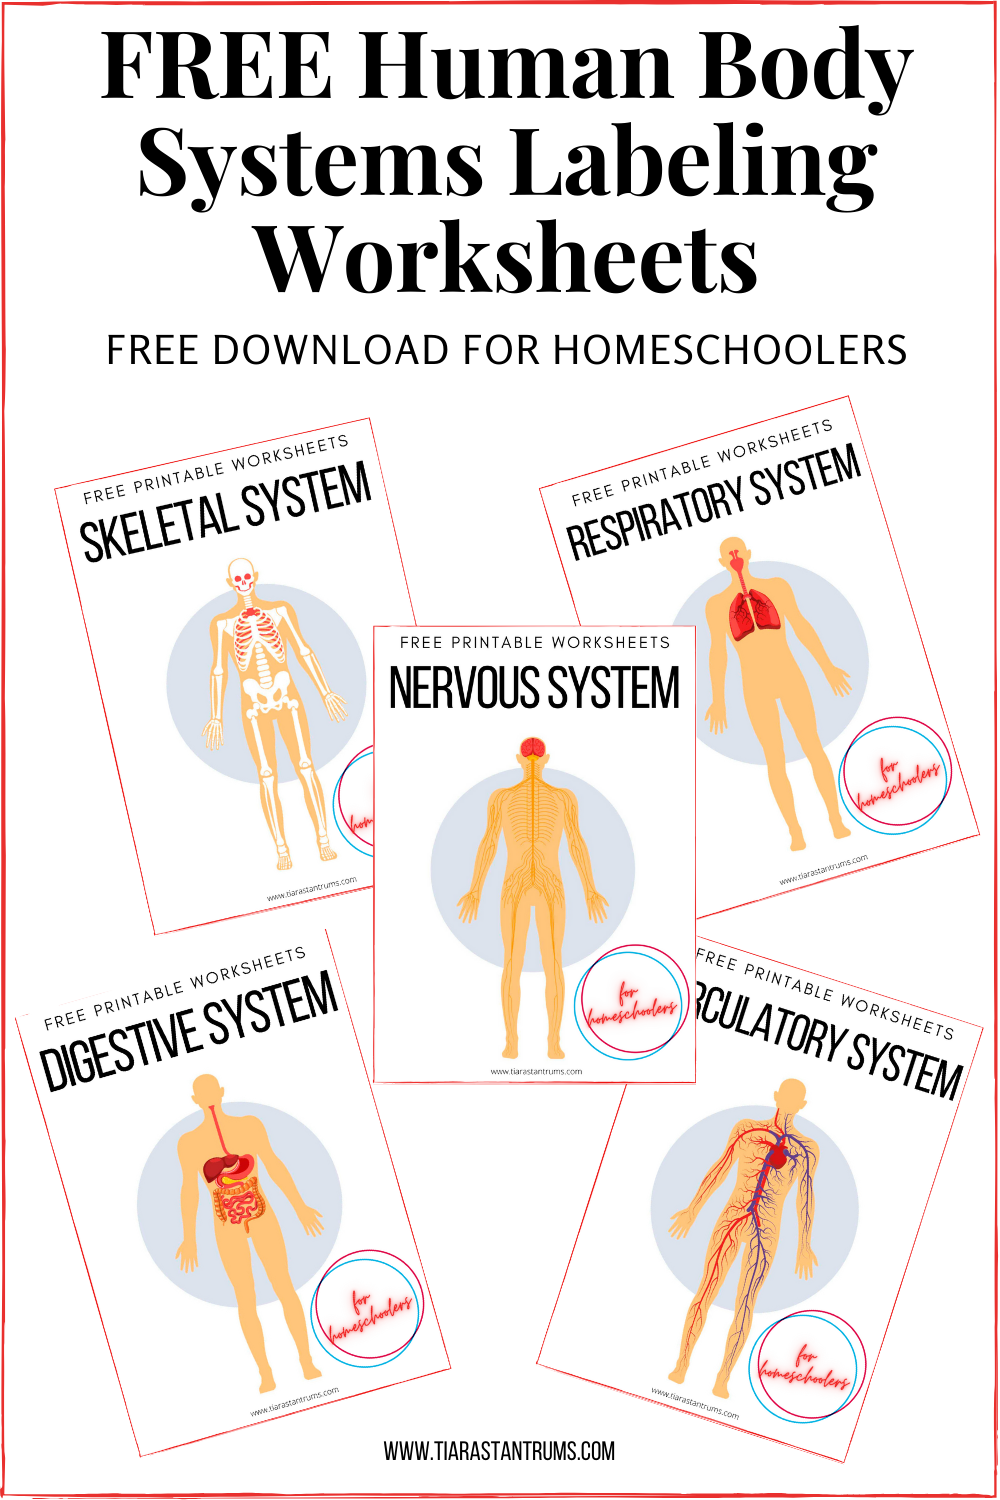 free-human-body-systems-labeling-worksheets-tiaras-tantrums